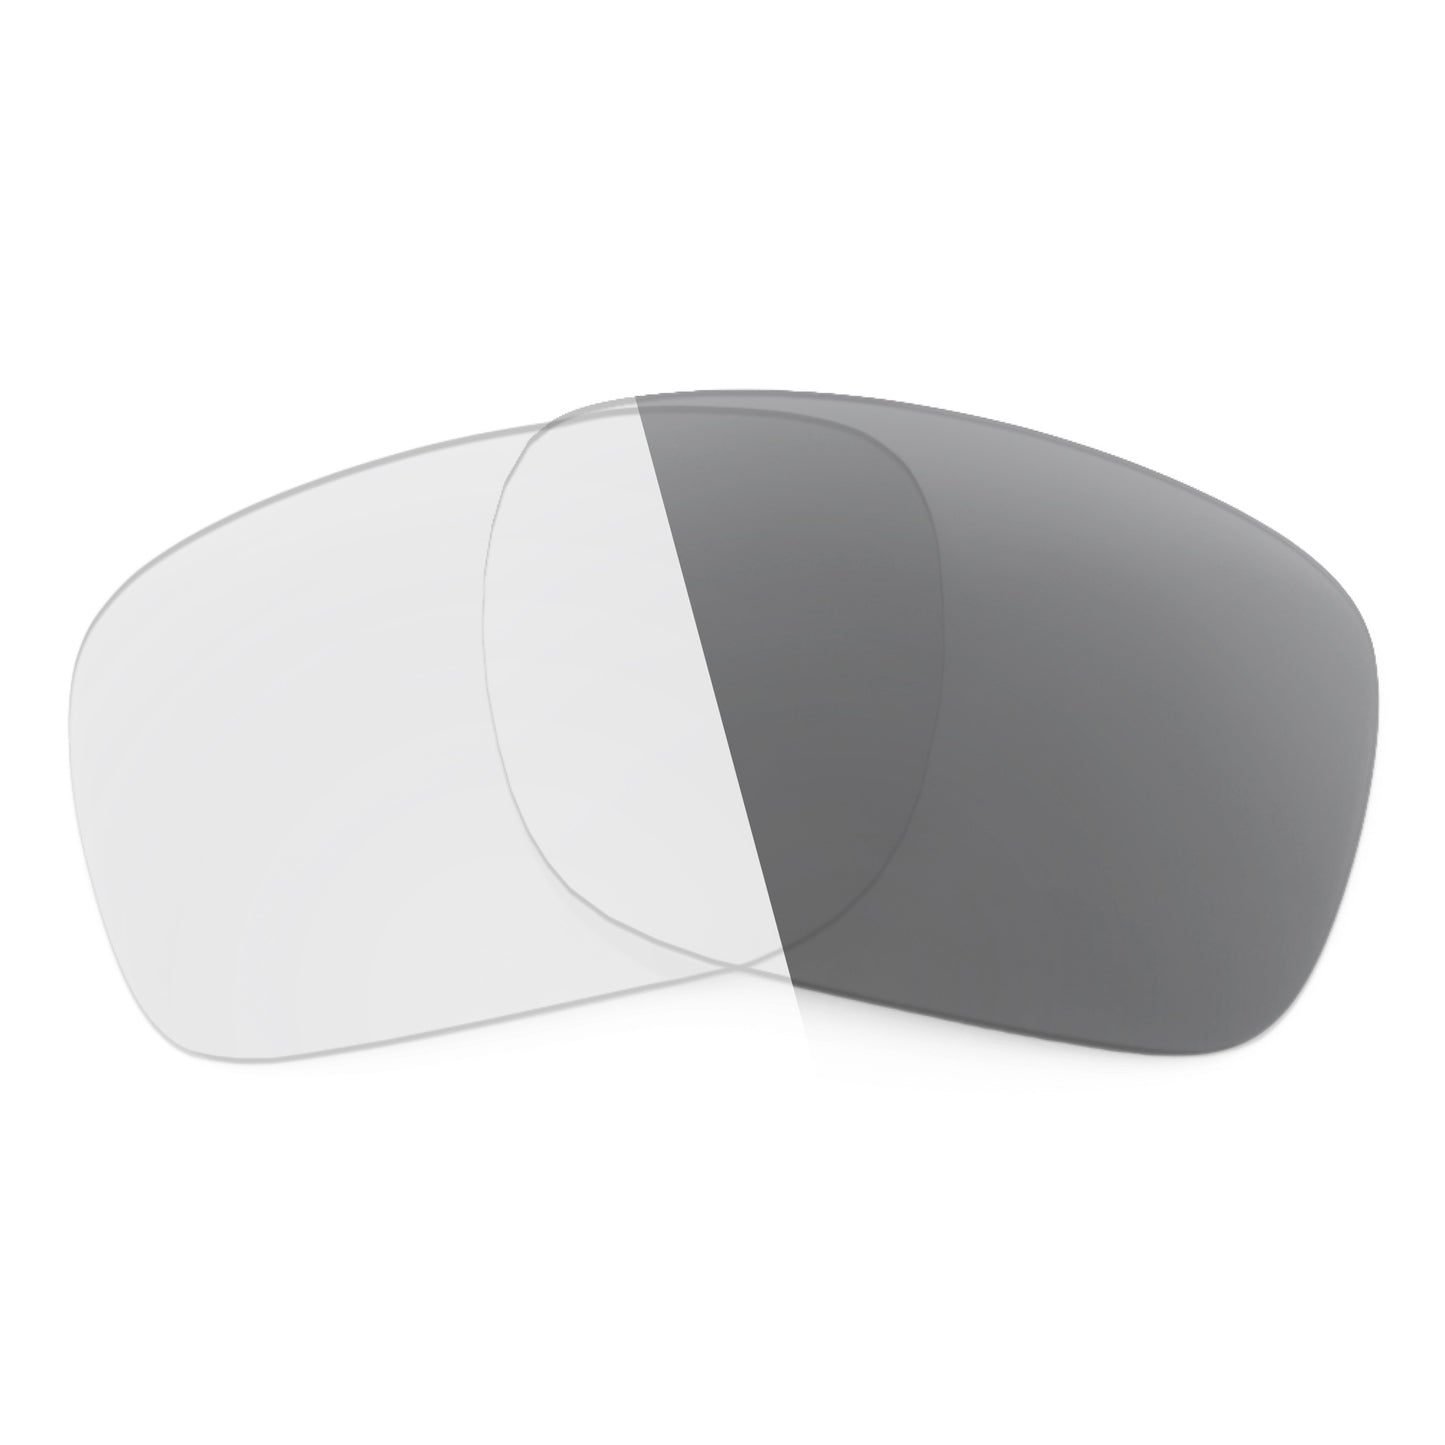 Revant replacement lenses for Ray-Ban New Caravan RB3636 58mm Non-Polarized Adapt Gray Photochromic